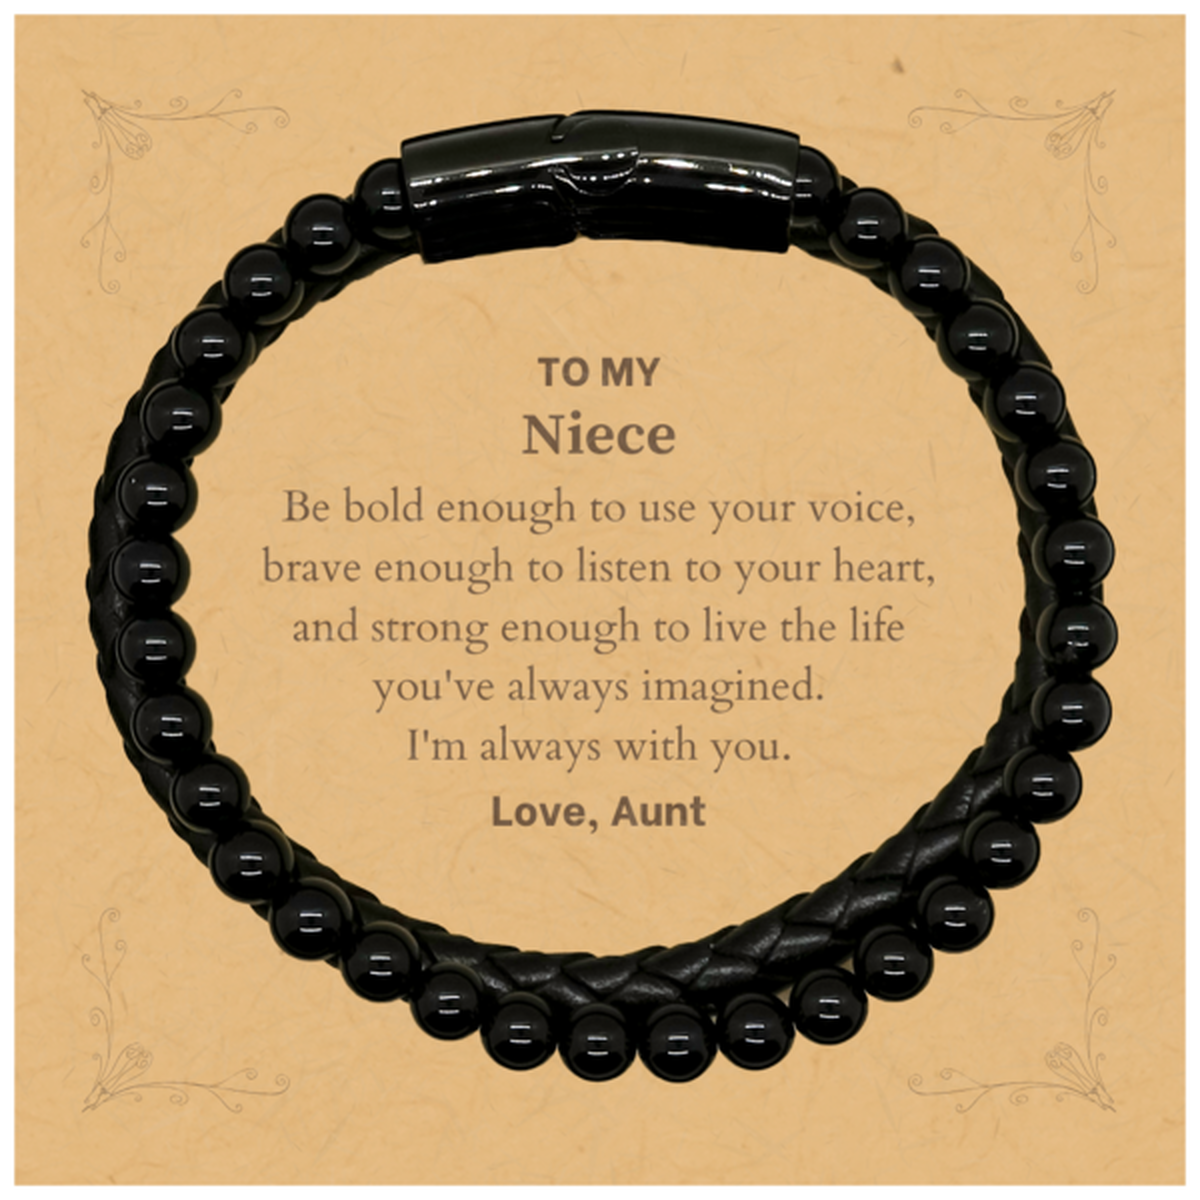 Keepsake Niece Stone Leather Bracelets Gift Idea Graduation Christmas Birthday Niece from Aunt, Niece Be bold enough to use your voice, brave enough to listen to your heart. Love, Aunt